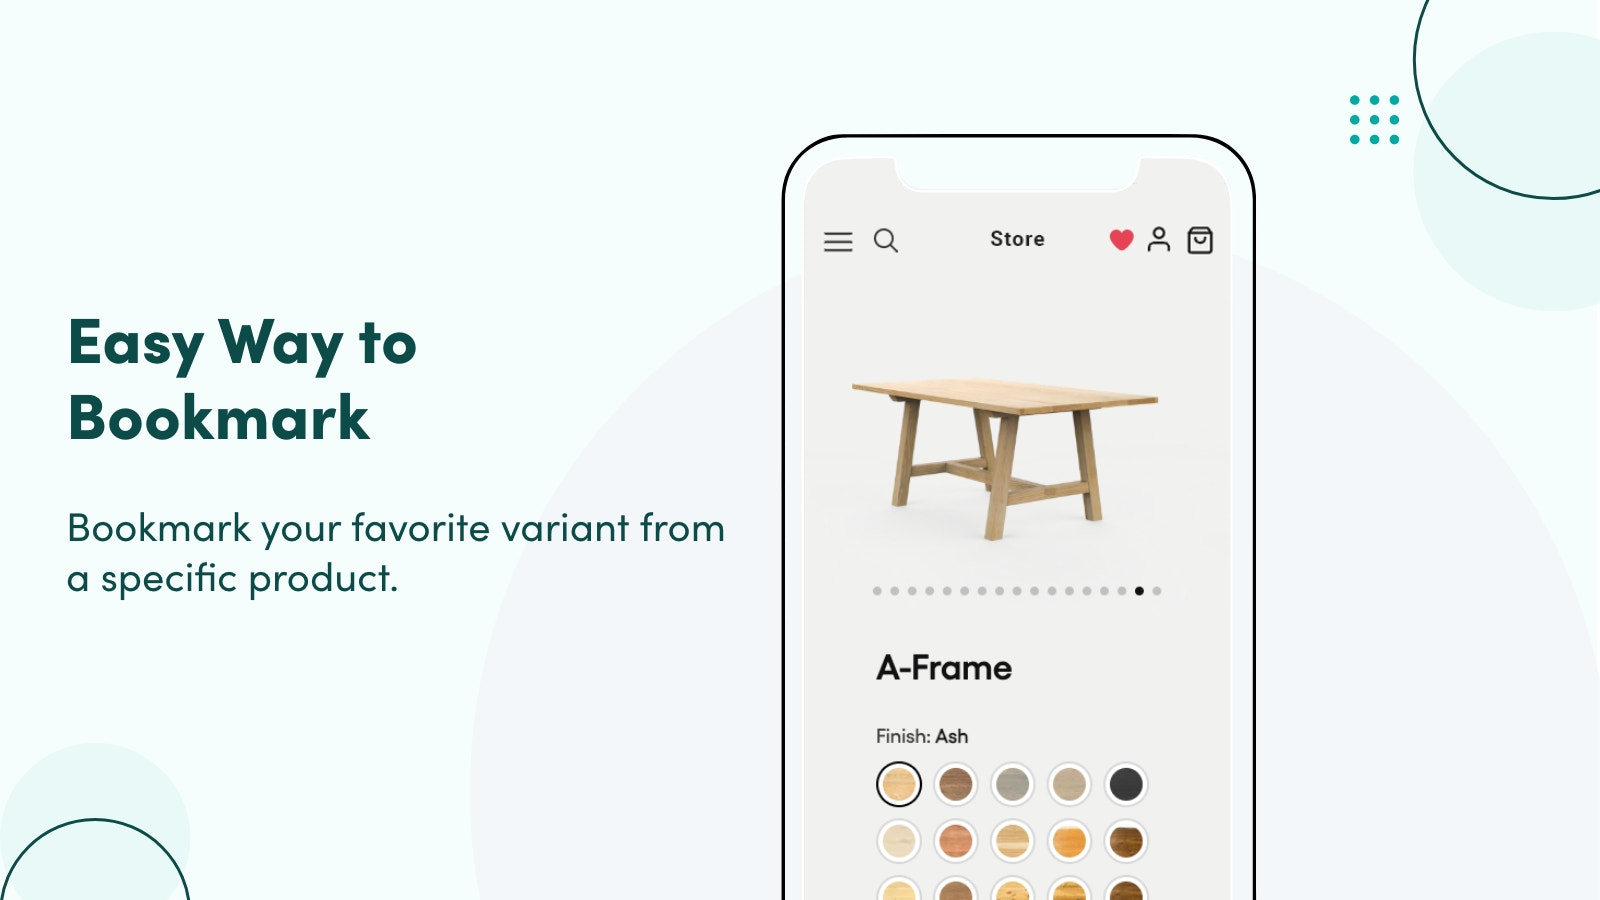 Bookmark your favorite variant from a specific product.